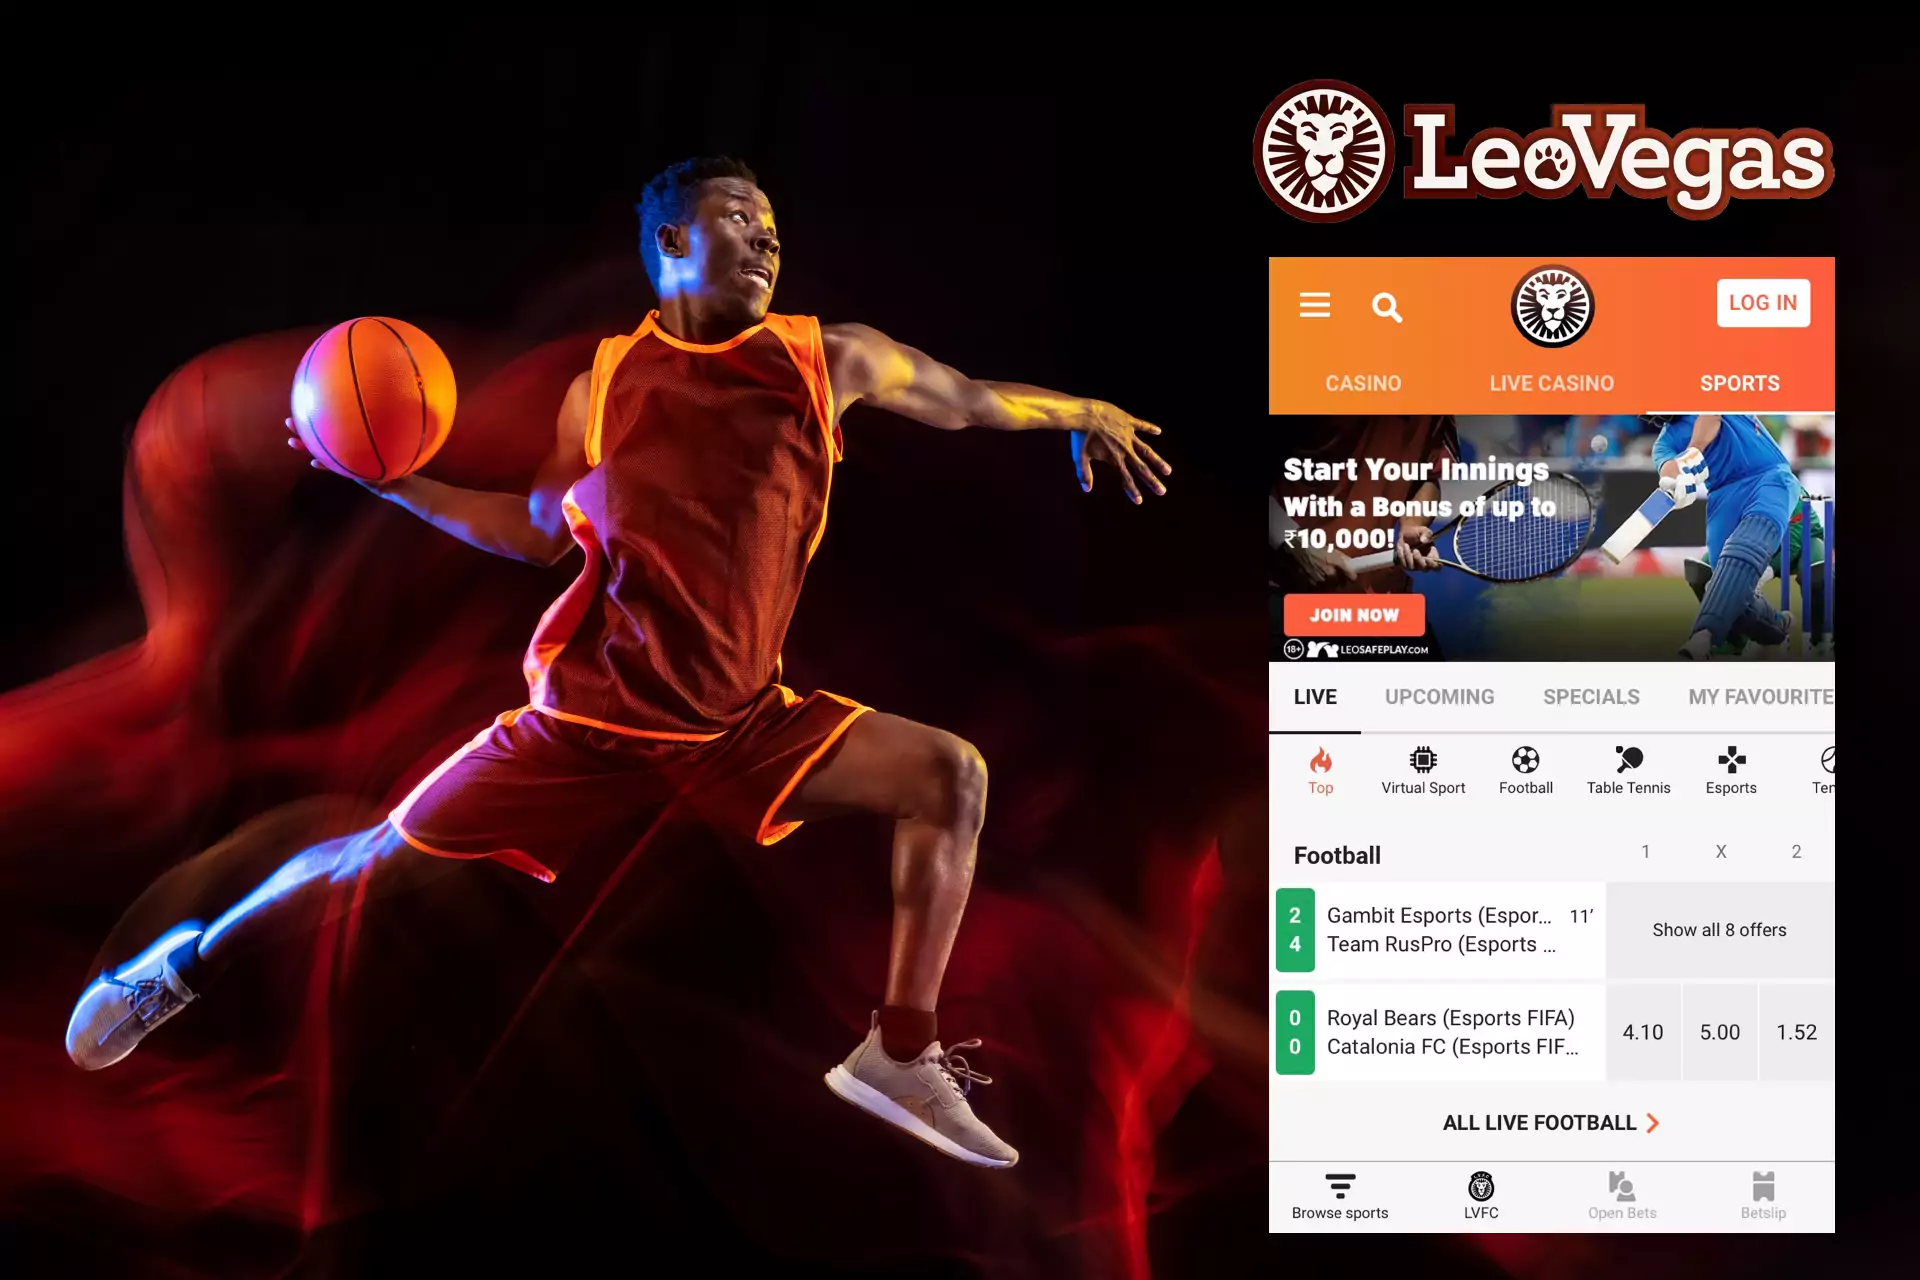 In the mobile app of LeoVegas, users can place bets for different kinds of sports.